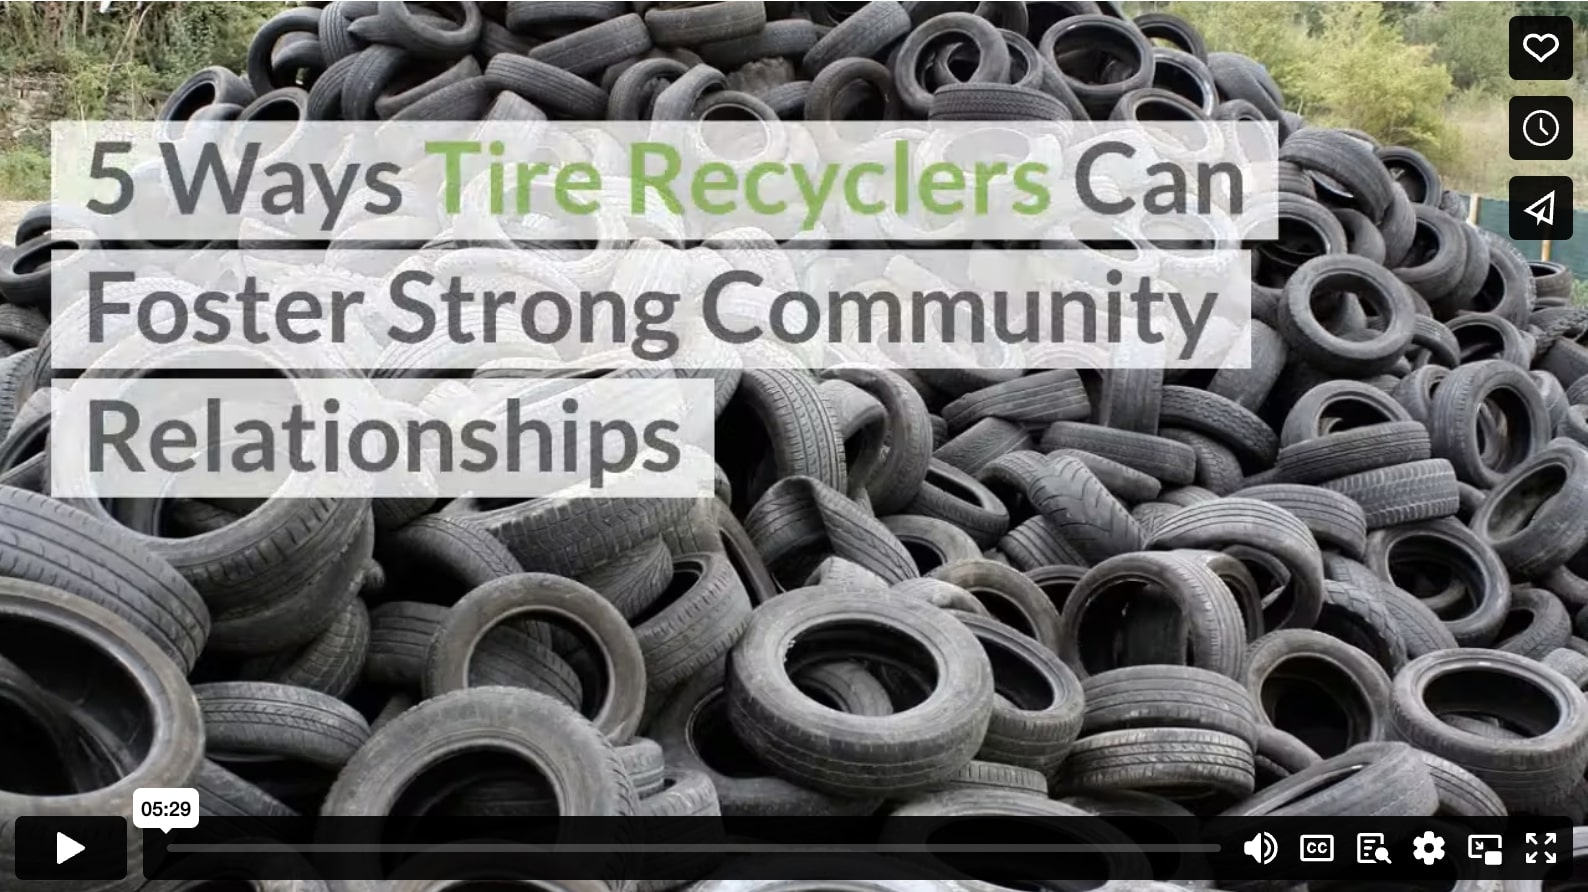 5 Ways Tire Recyclers Can Foster Strong Community Relationships